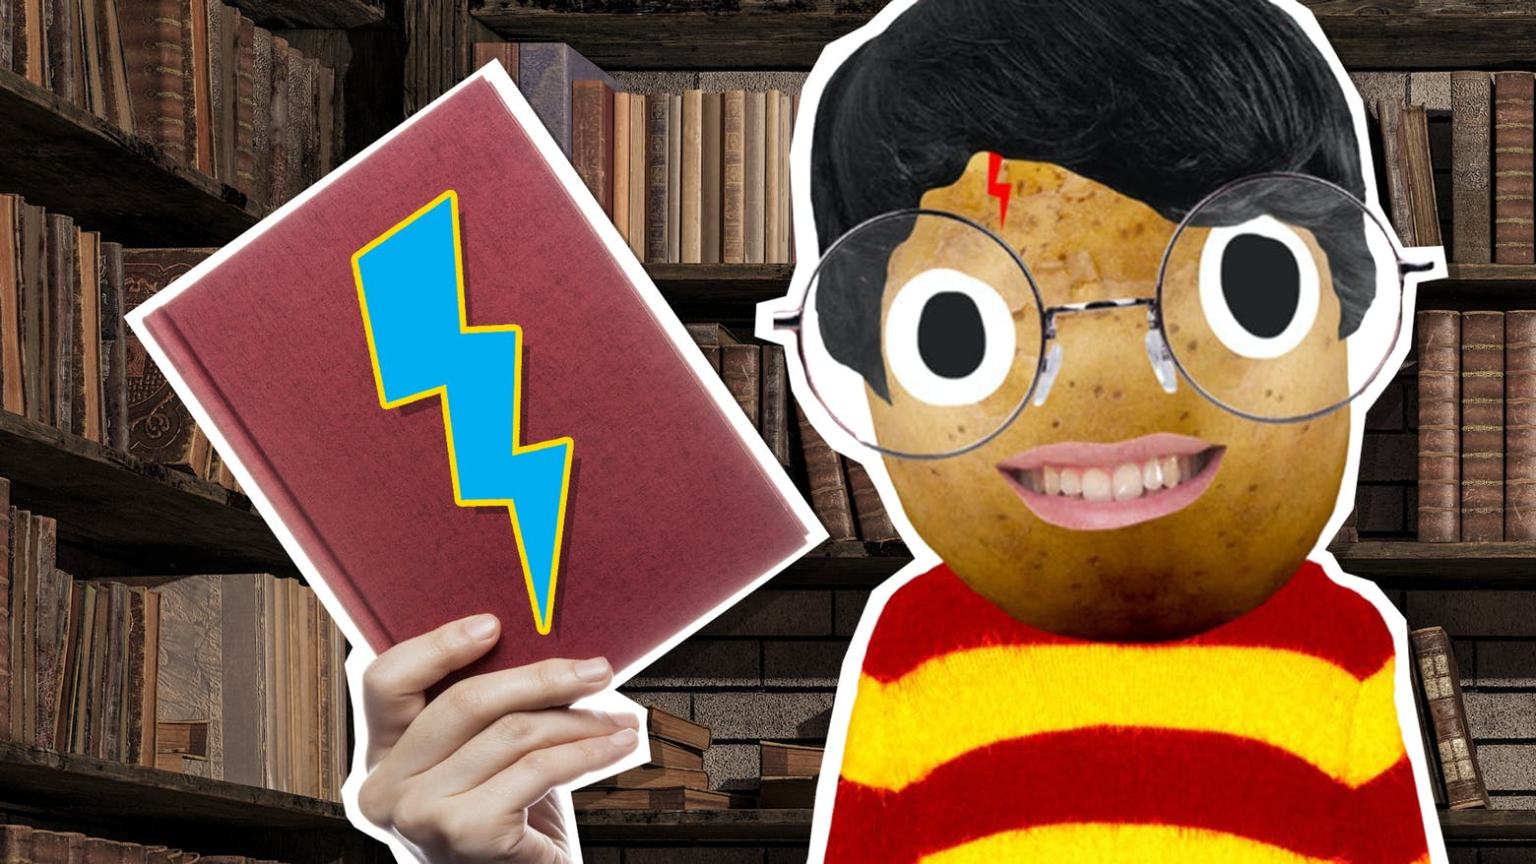 Harry Potter in a library